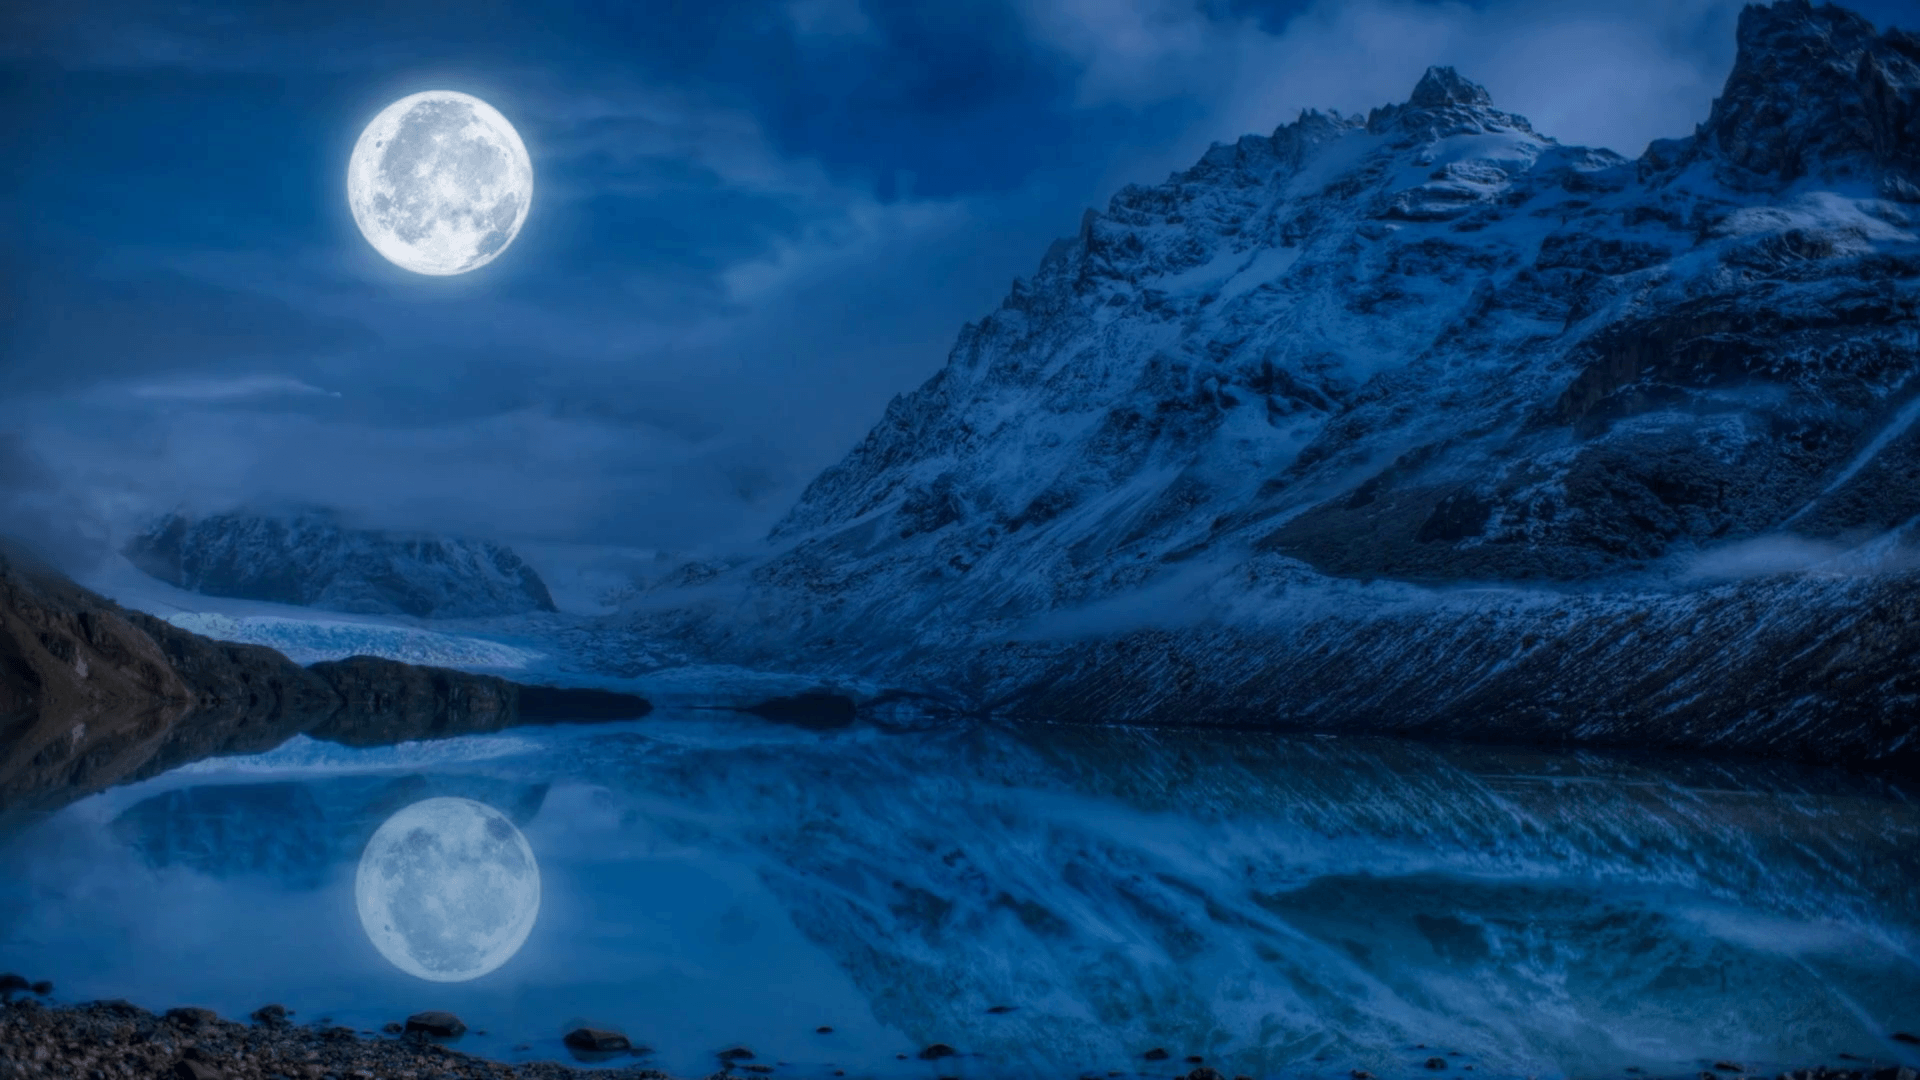 Night mountain moon scape with snow and lake loop